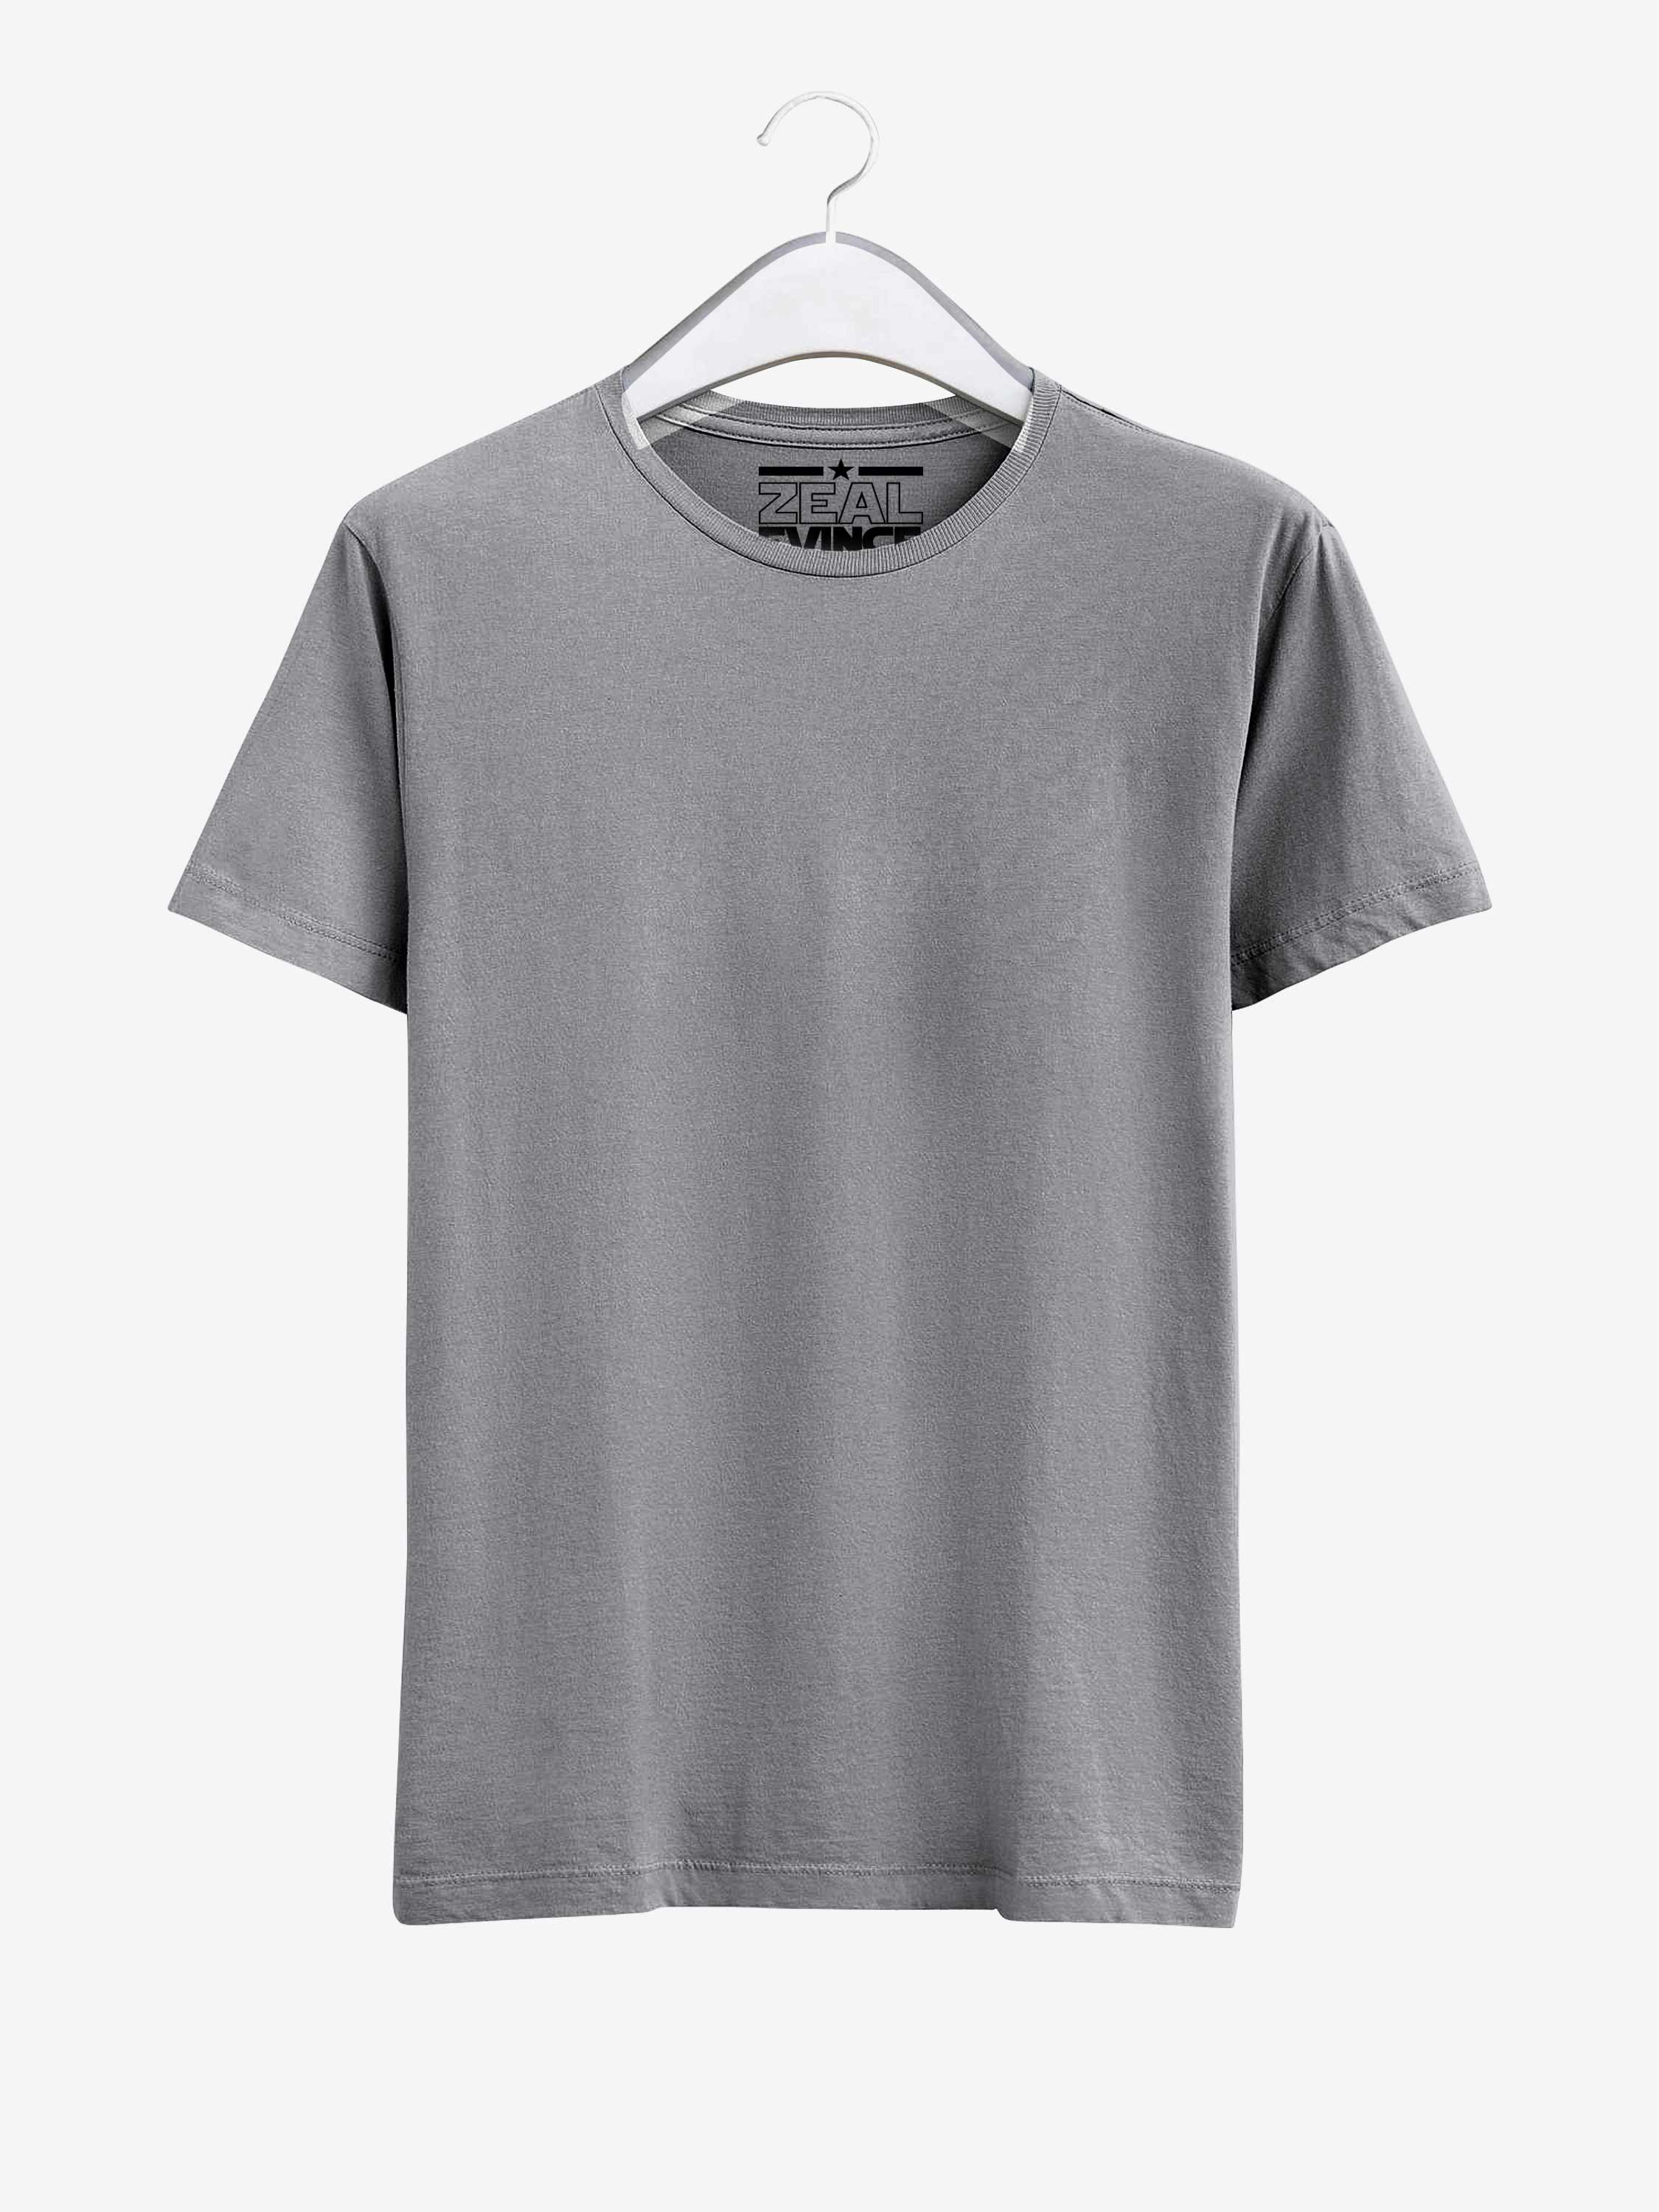 gray t shirt images